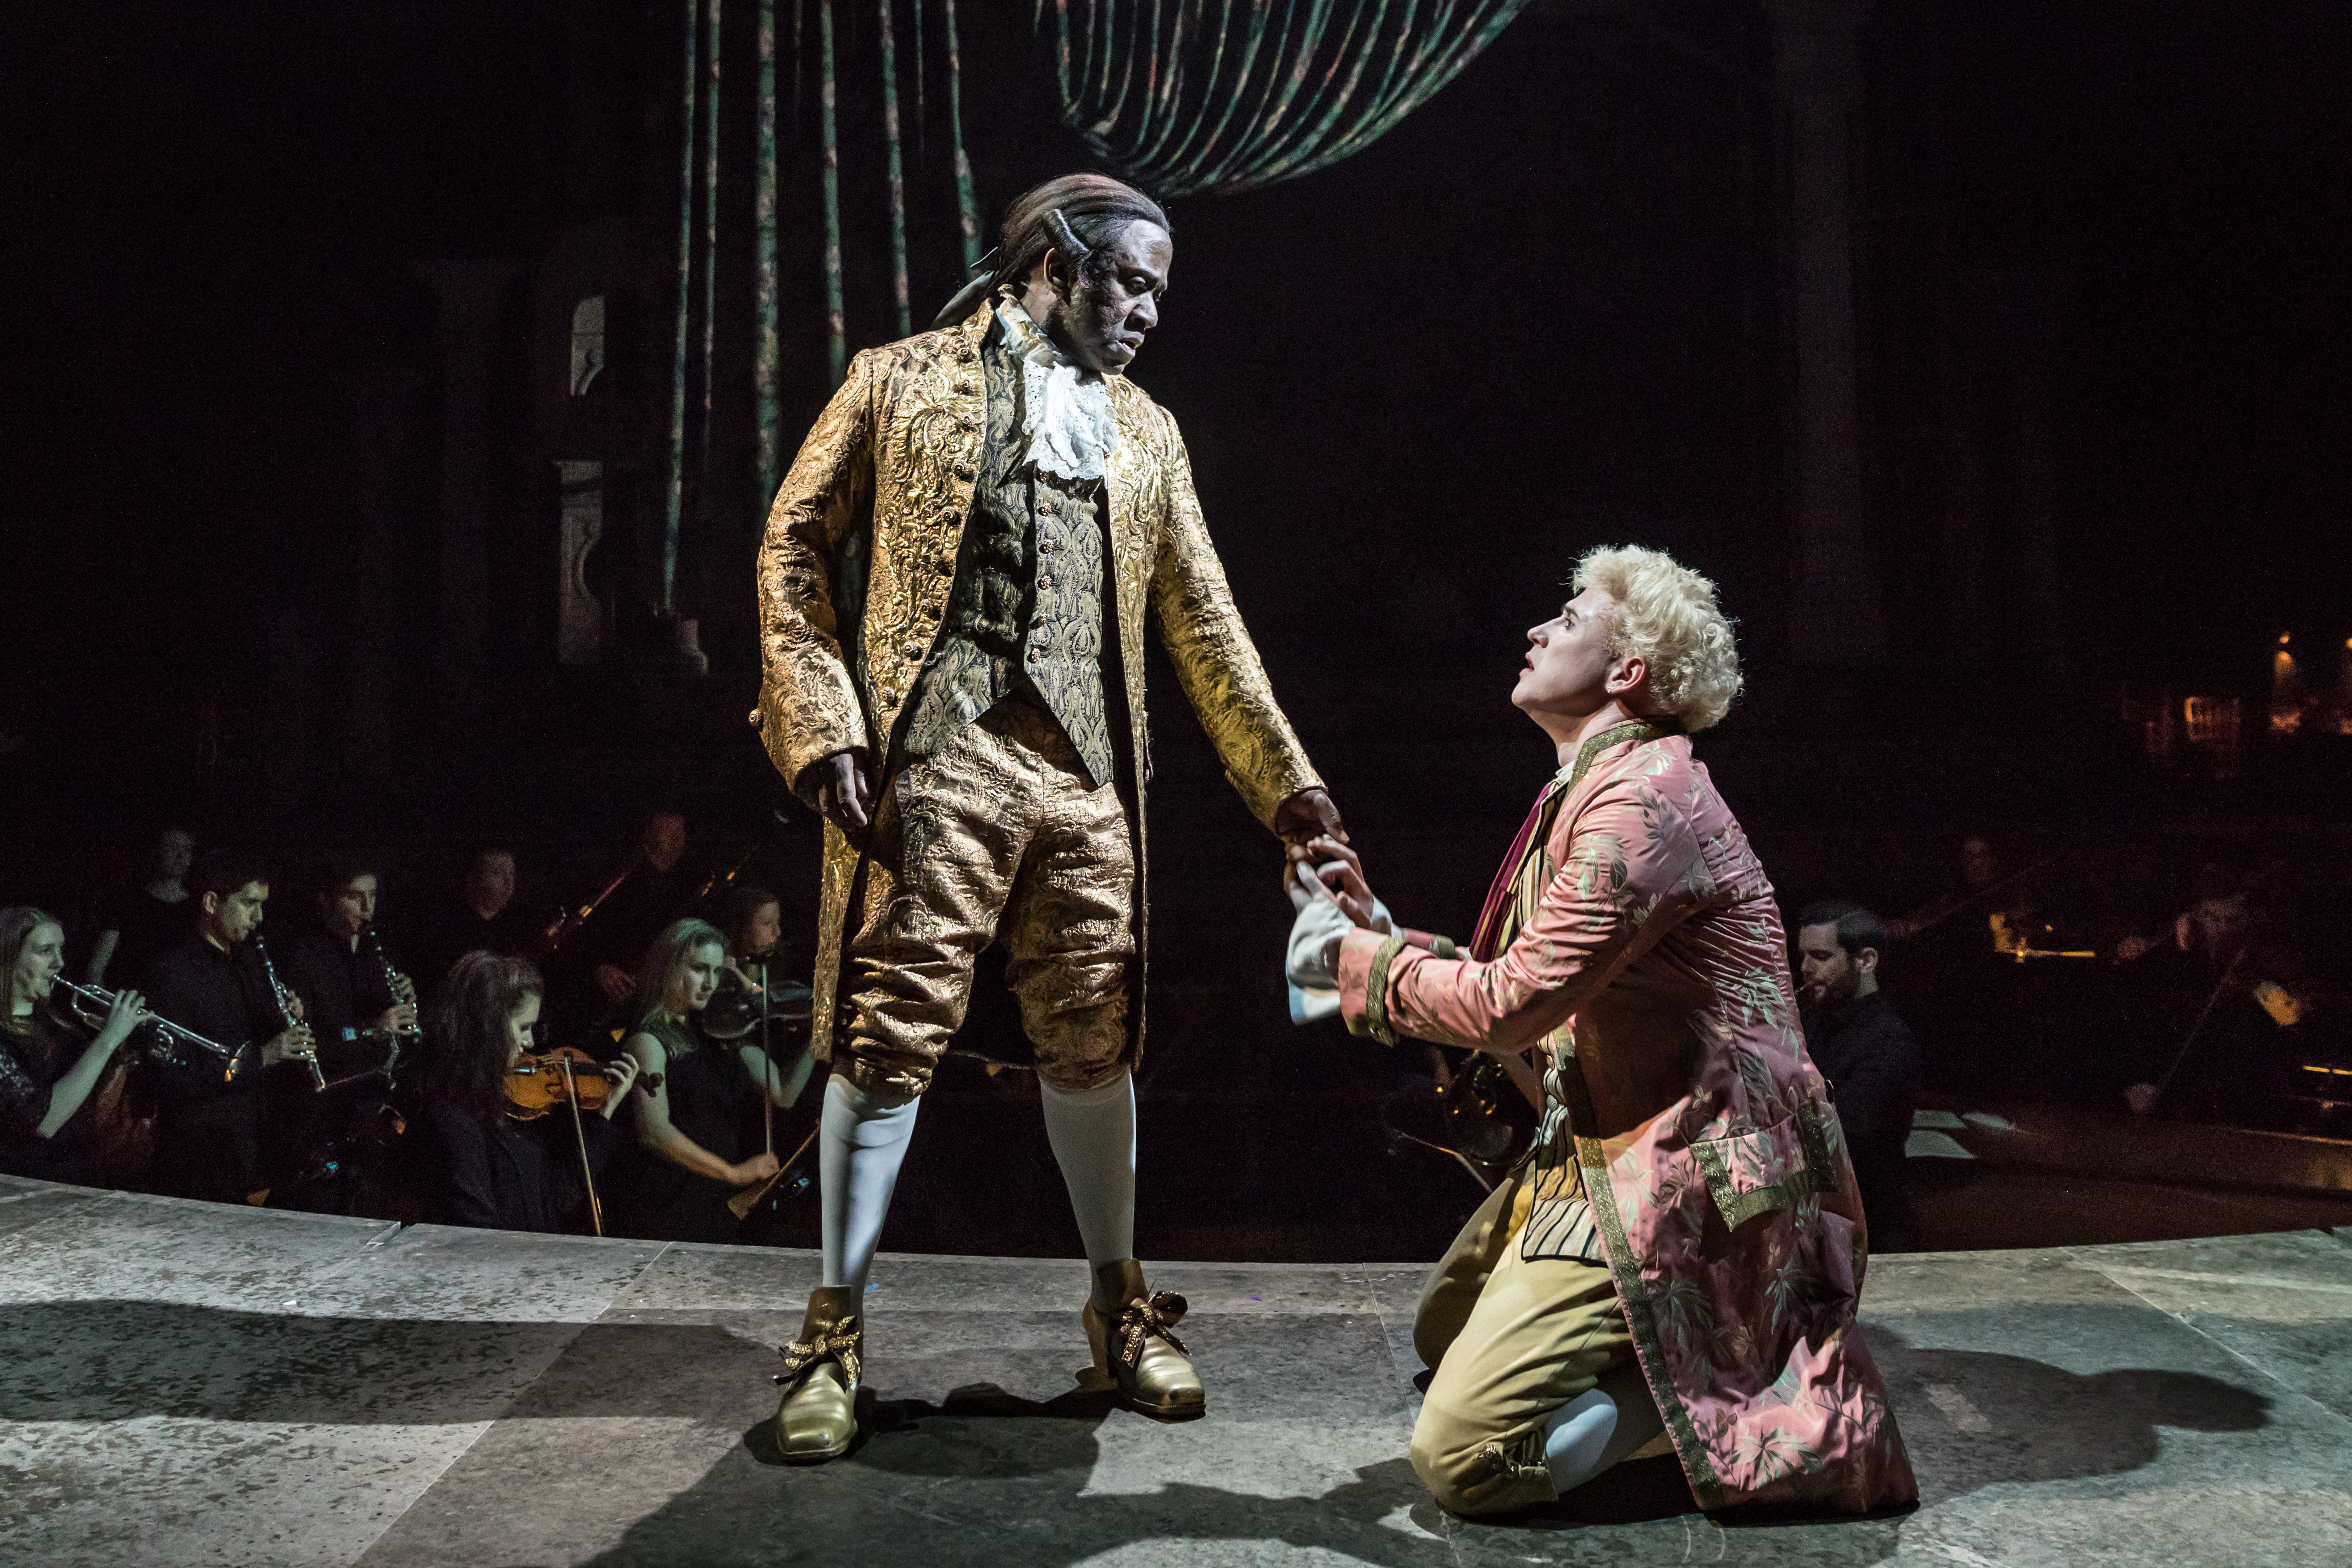 Lucian Msamati as Antonio Salieri and Adam Gillen as Wolfgang Mozart in Amadeus at the National Theatre (c) Marc Brenner